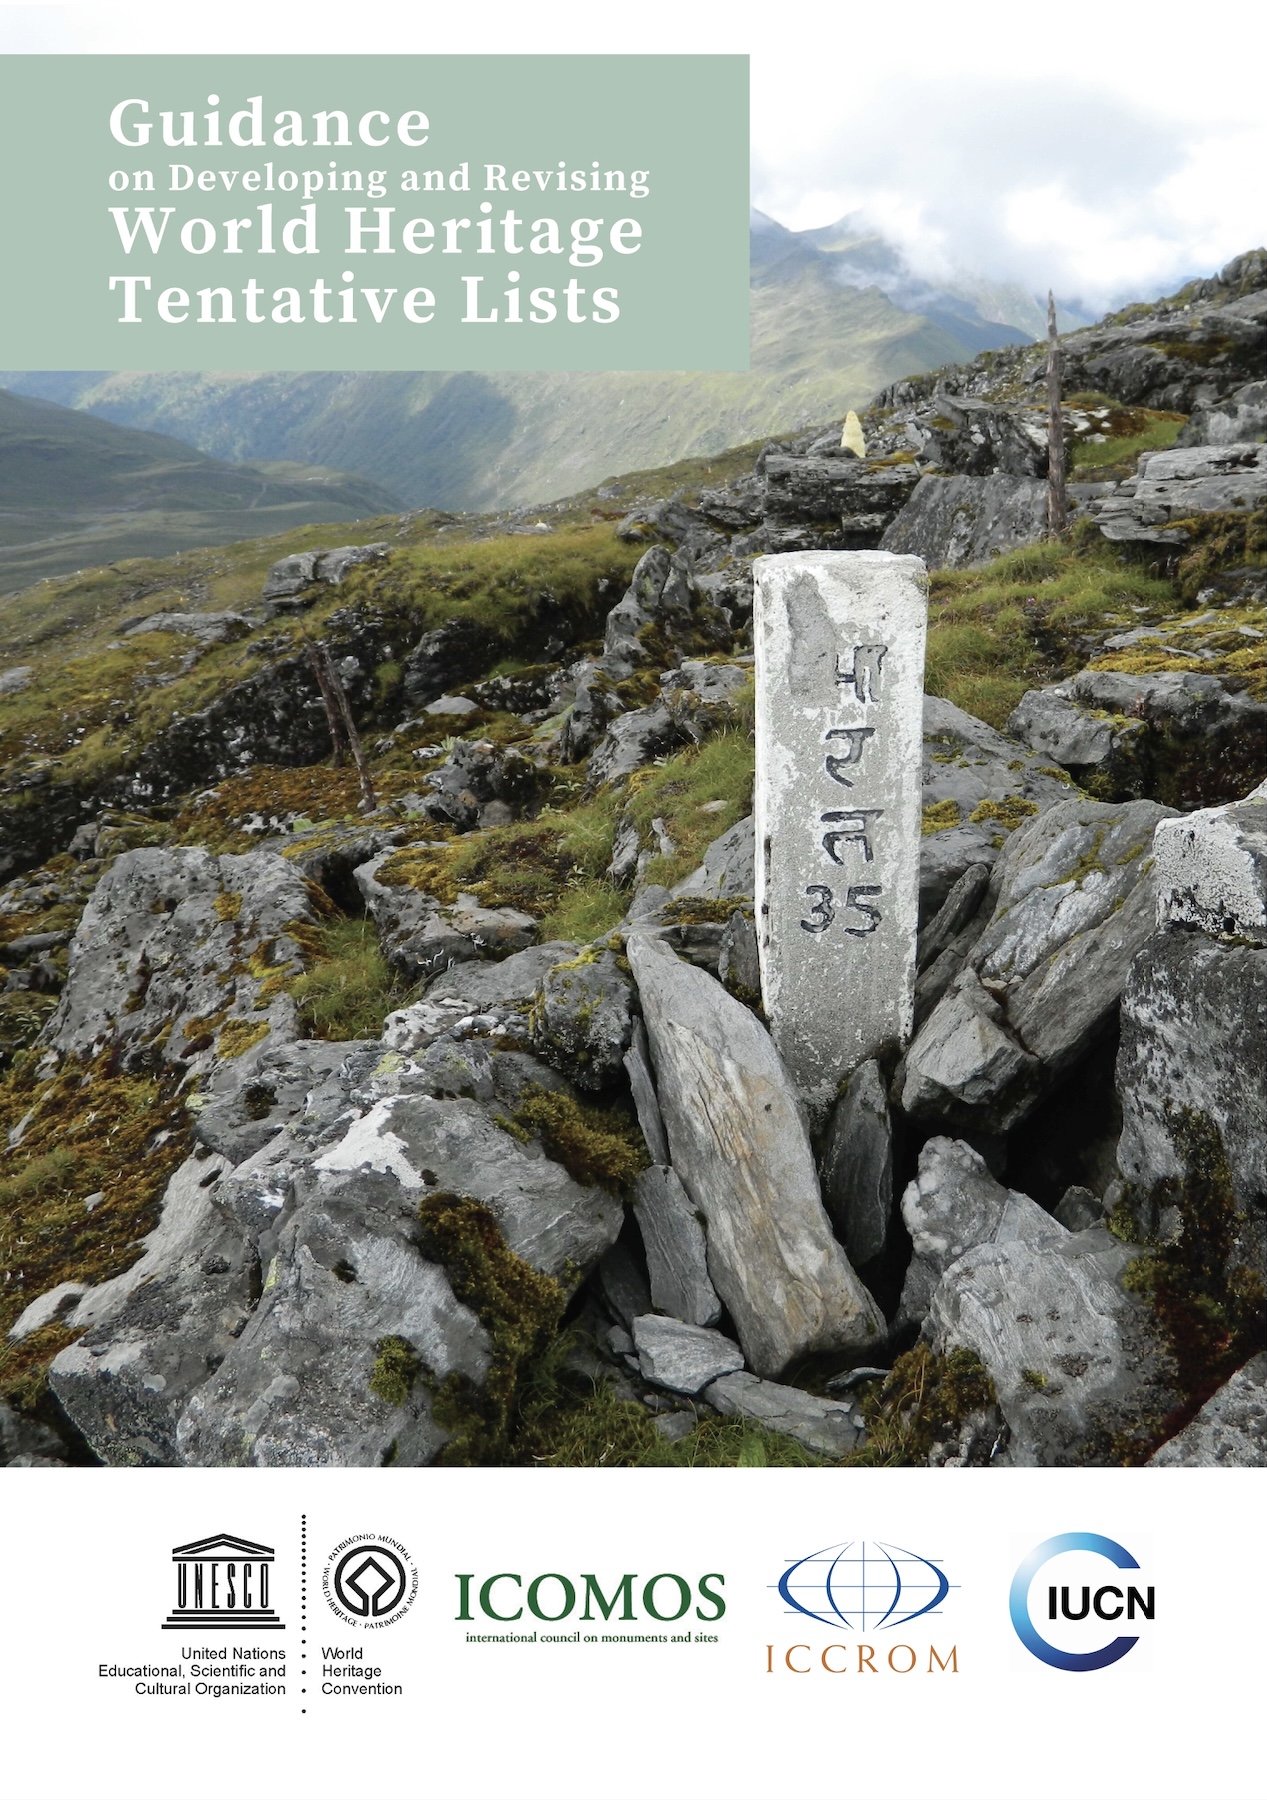 Guidance on Developing and Revising World Heritage Tentative Lists